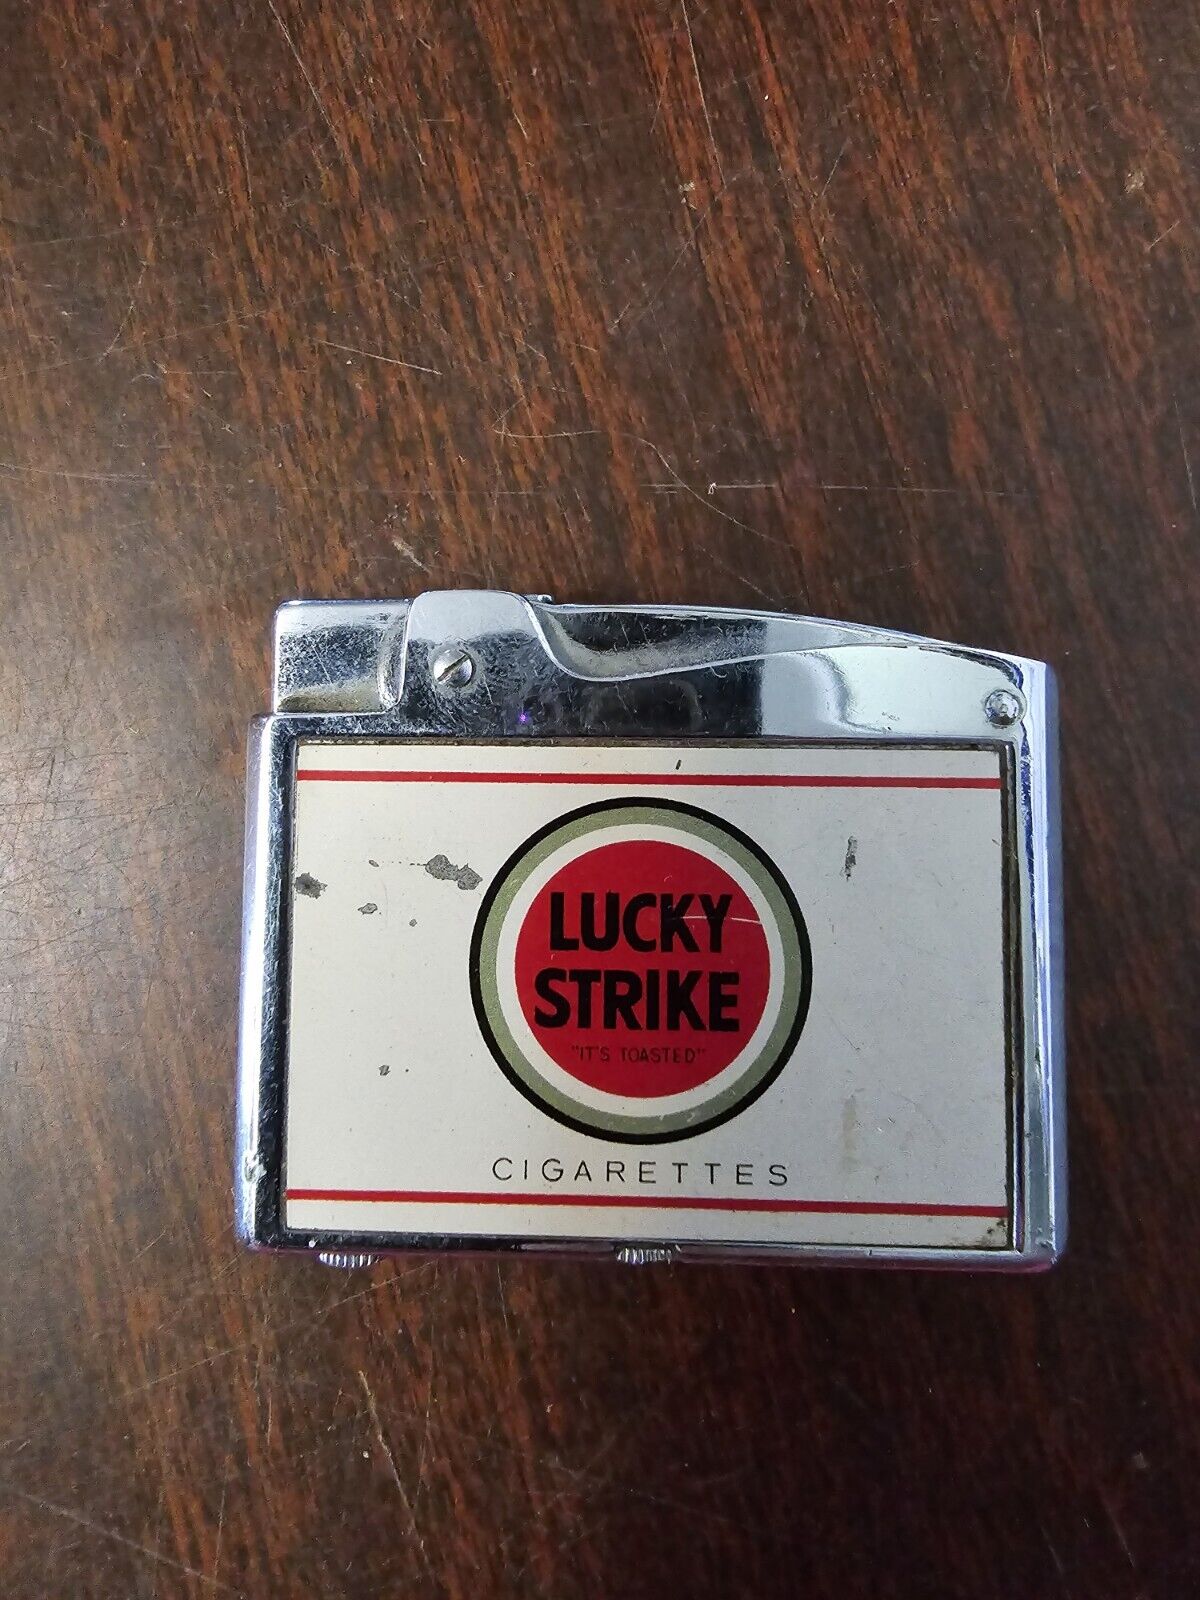 Vintage Continental Advertising Flat Lighter Lucky Strike Cigarettes. RARE